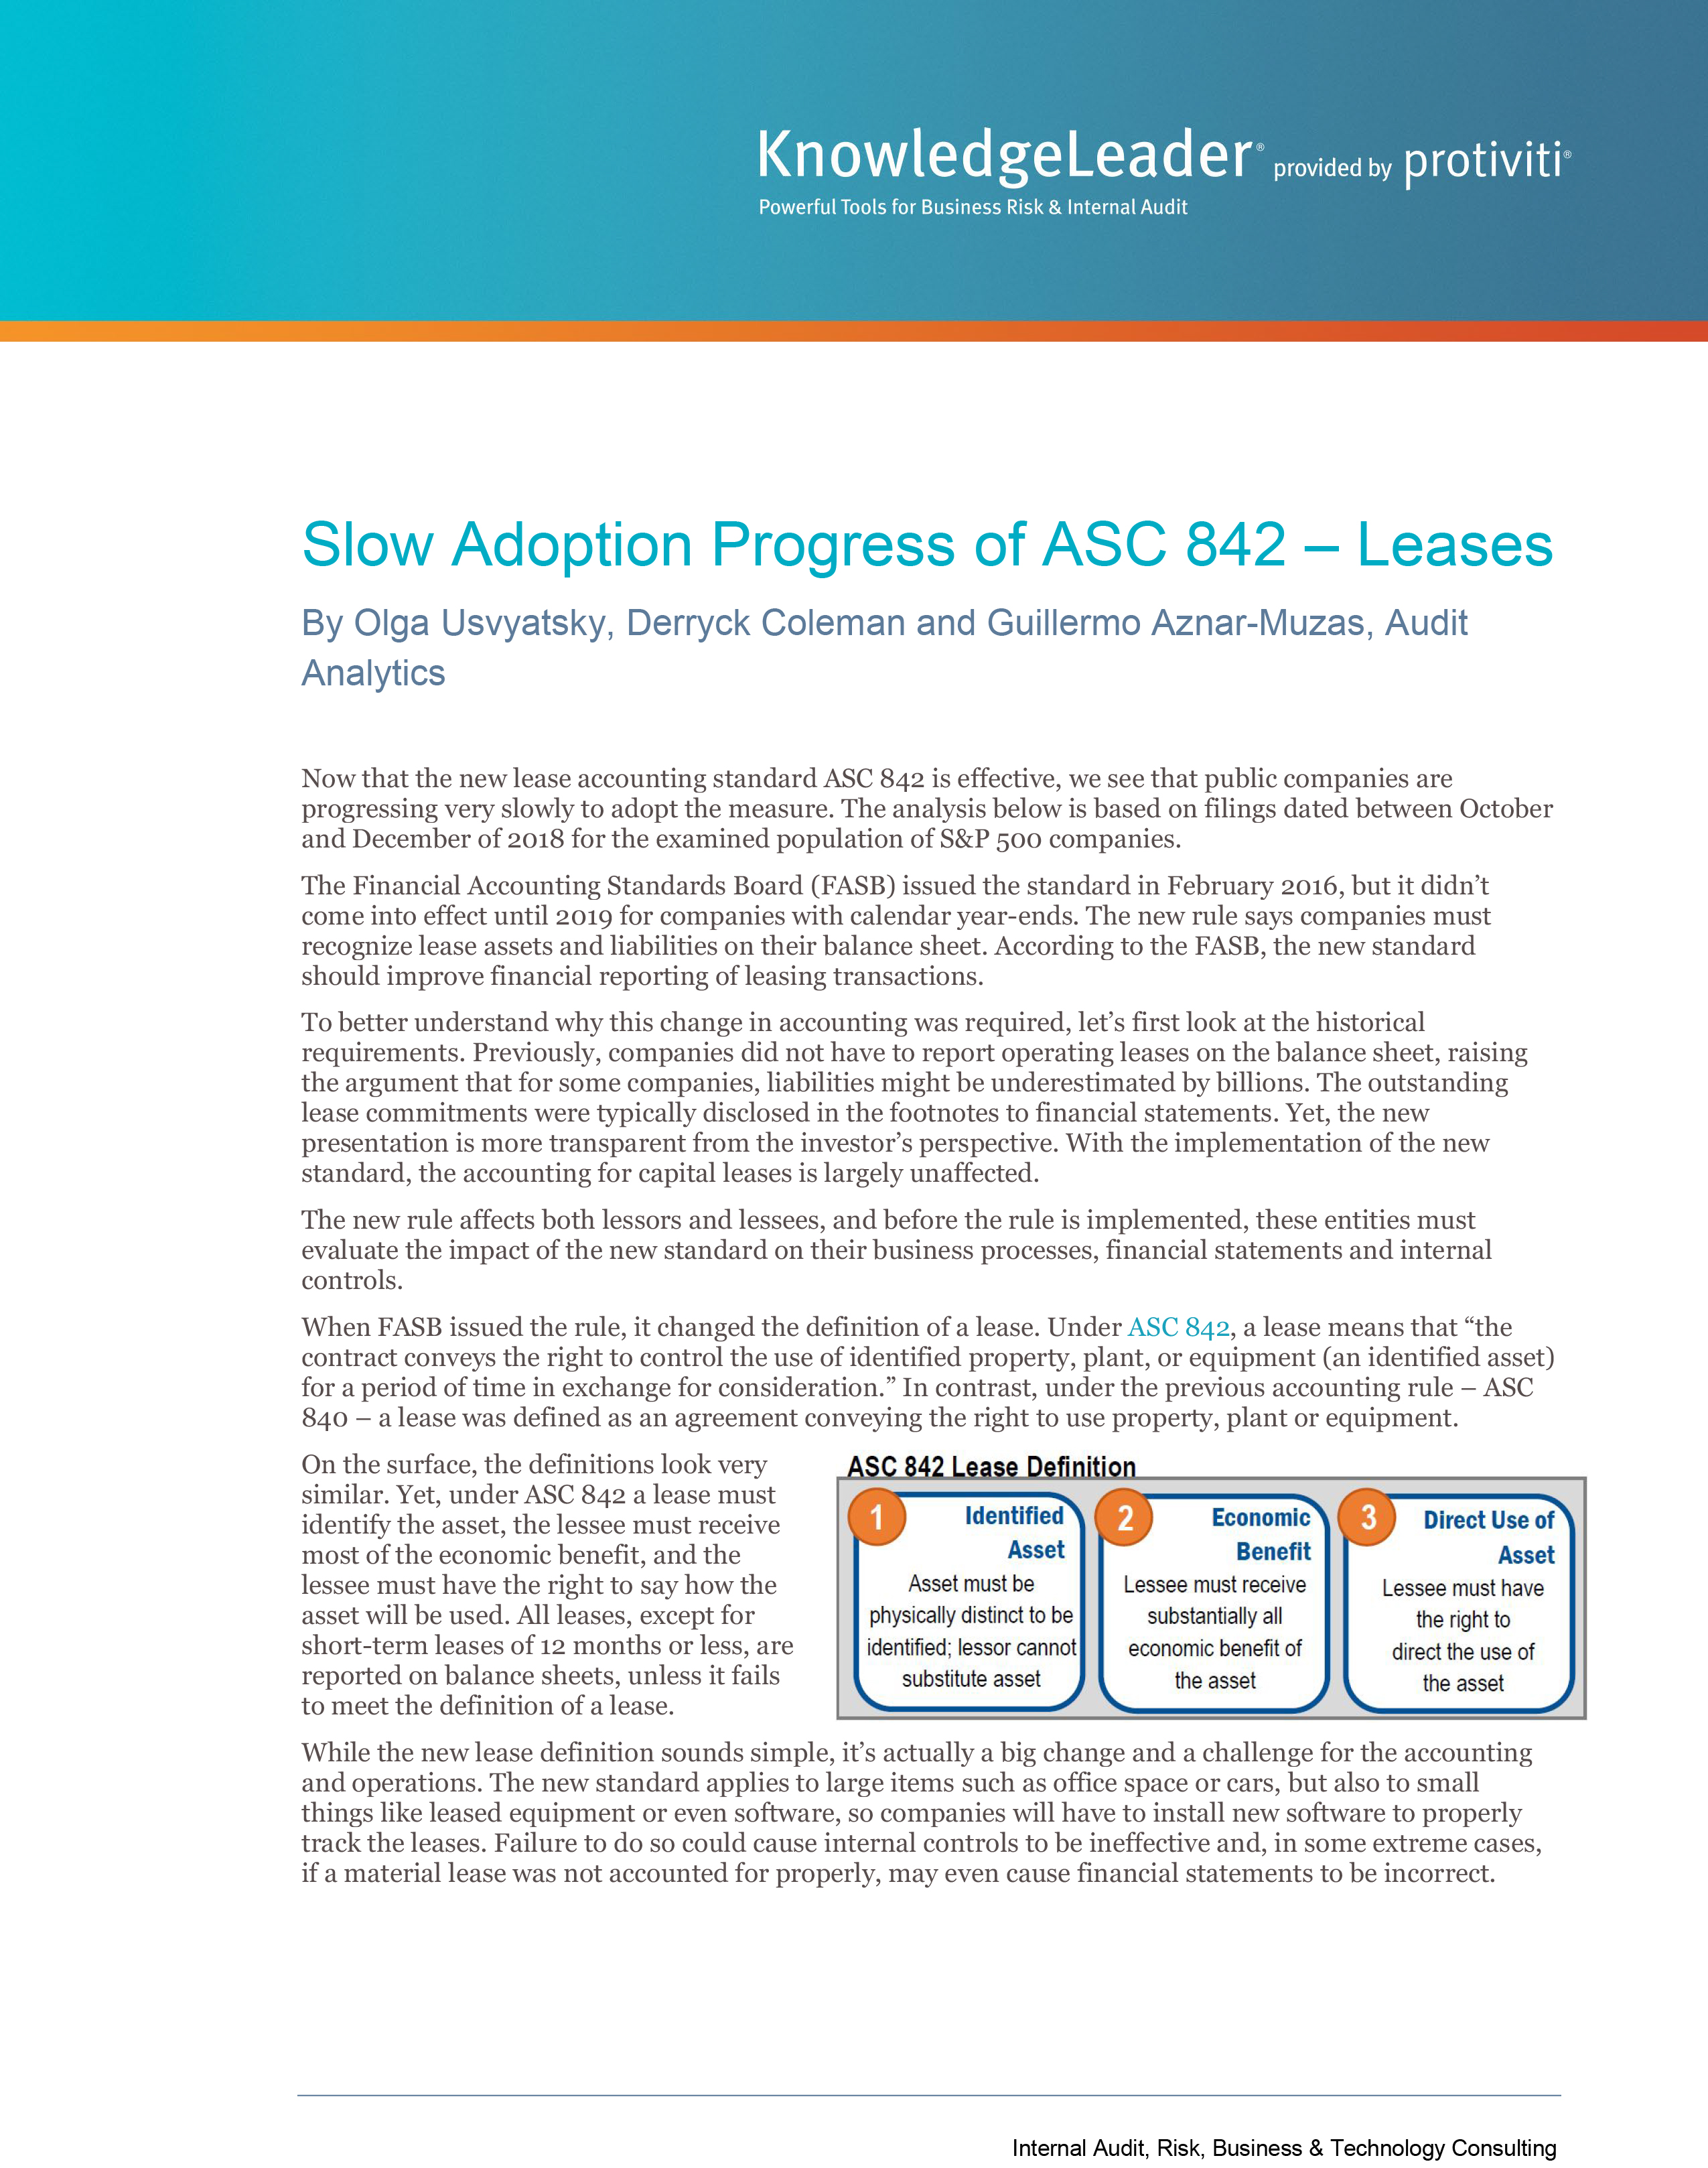 Screenshot of the first page of Slow Adoption Progress of ASC 842 – Leases